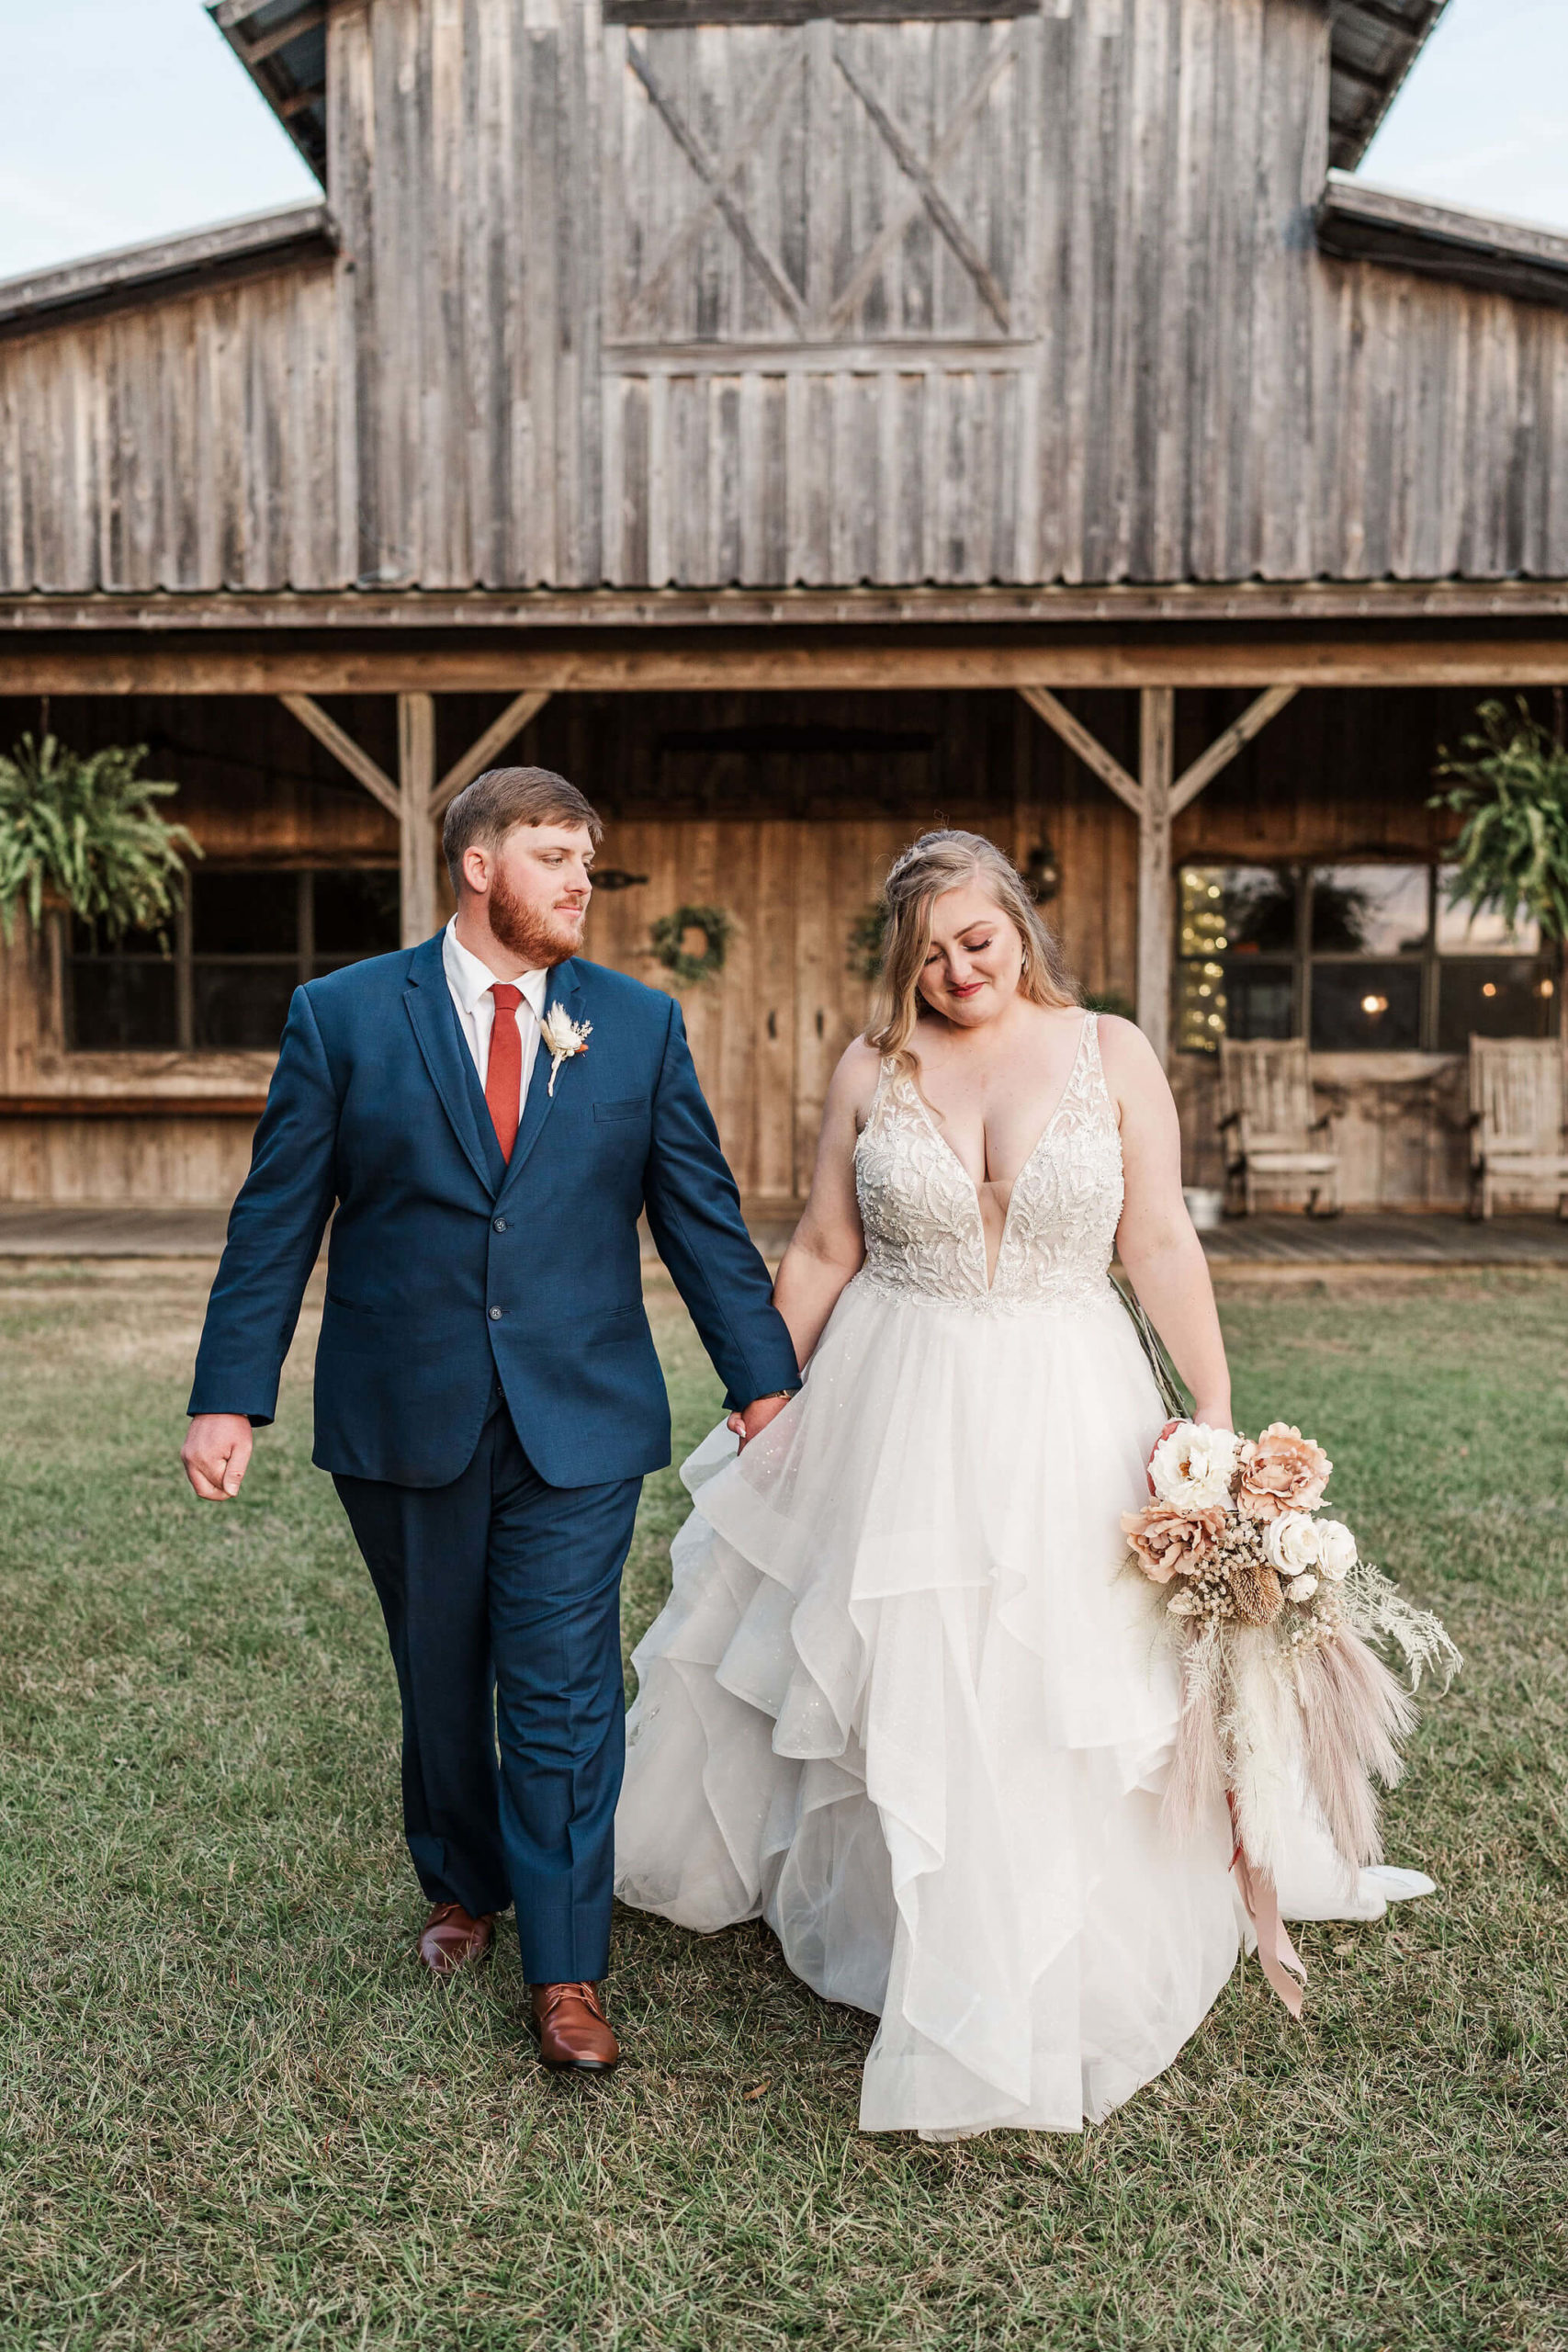 Bride and groom walking in front of rustic barn. Groom is smiling at bride while she's looking down at her dress